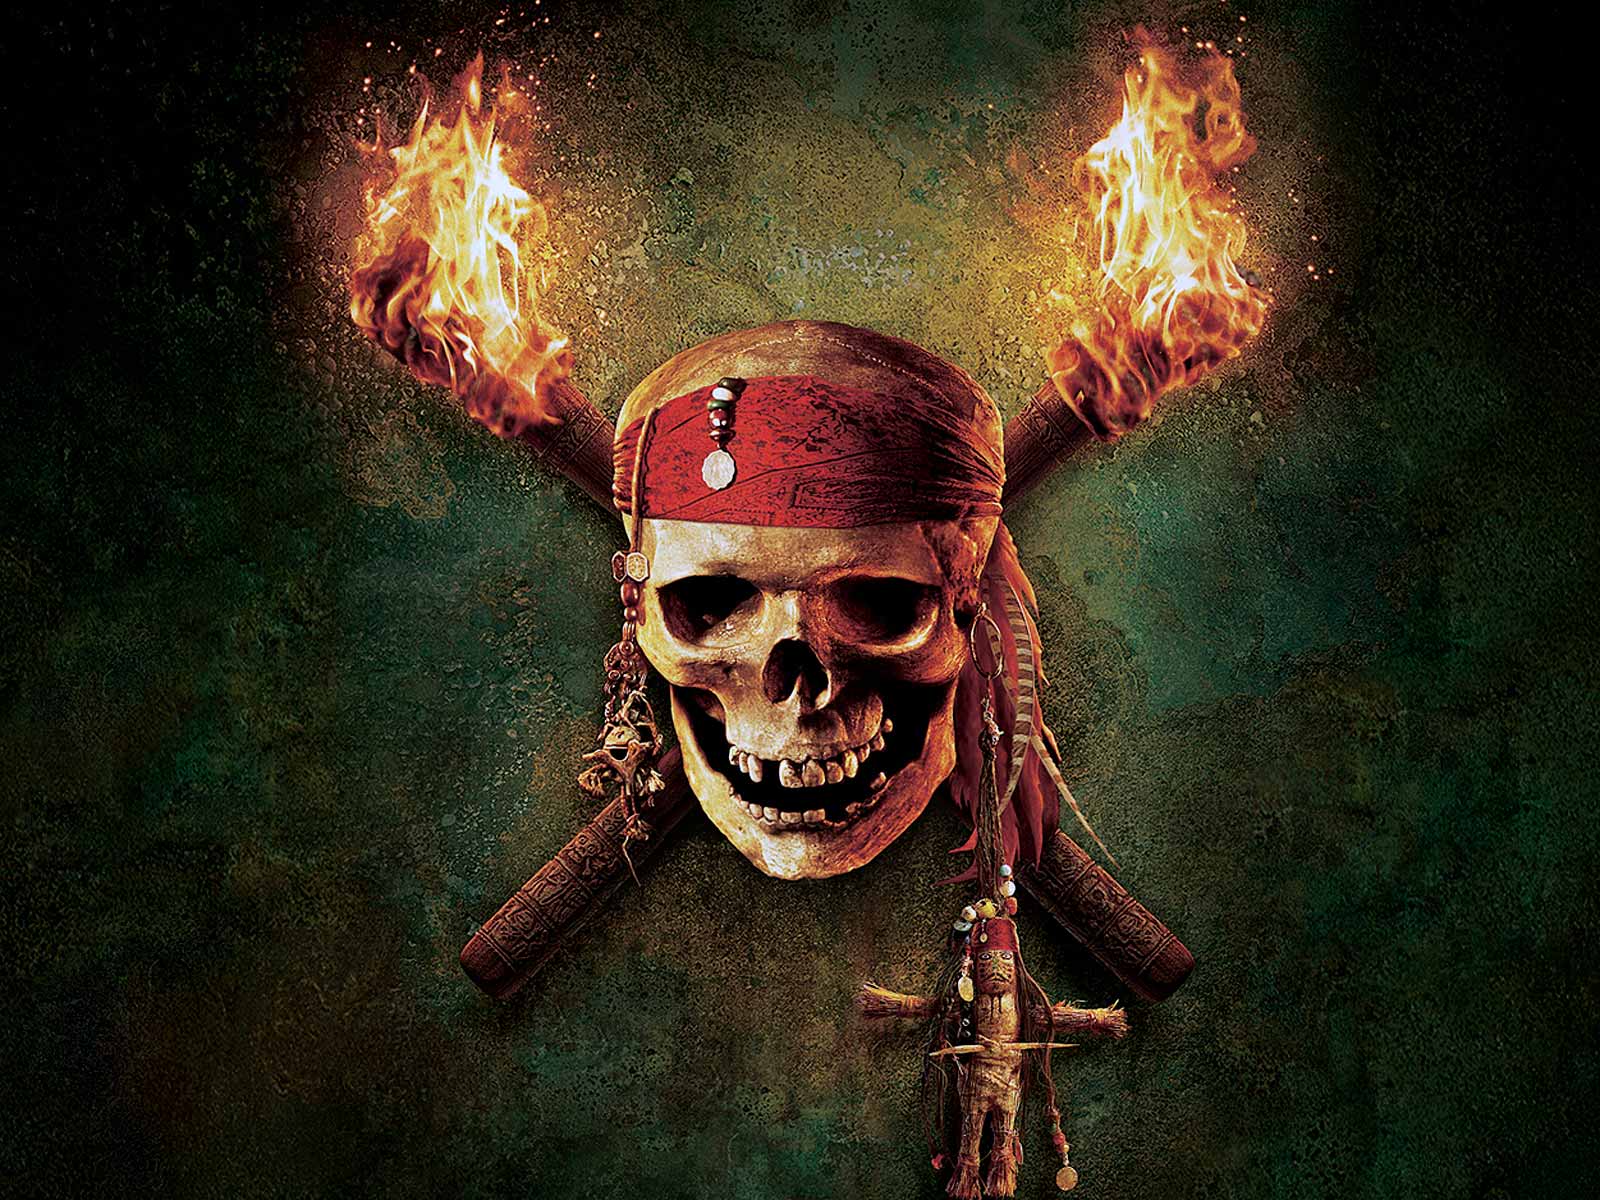 Johnny Depp in Pirates Of The Caribbean Wallpapers HD Wallpapers rh